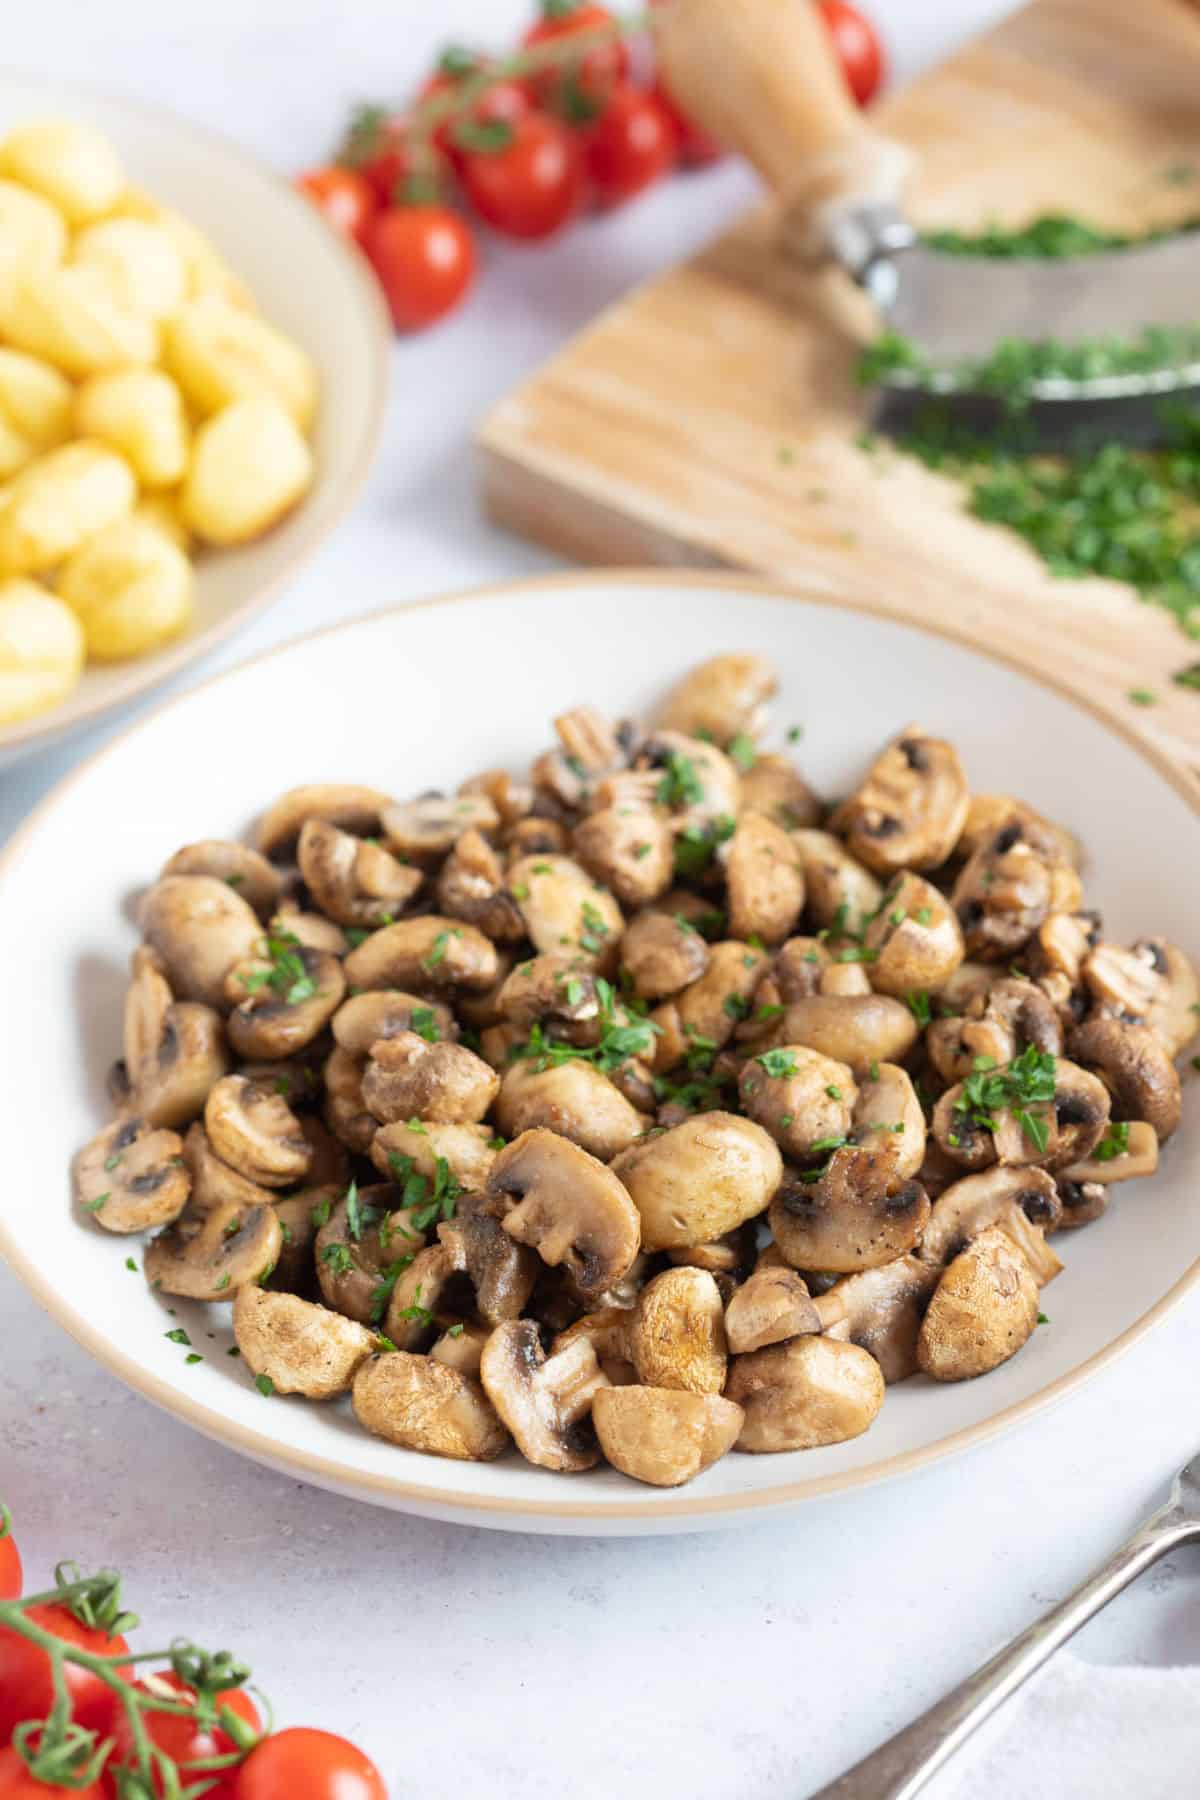 A plate of air fryer garlic mushrooms with parsley.